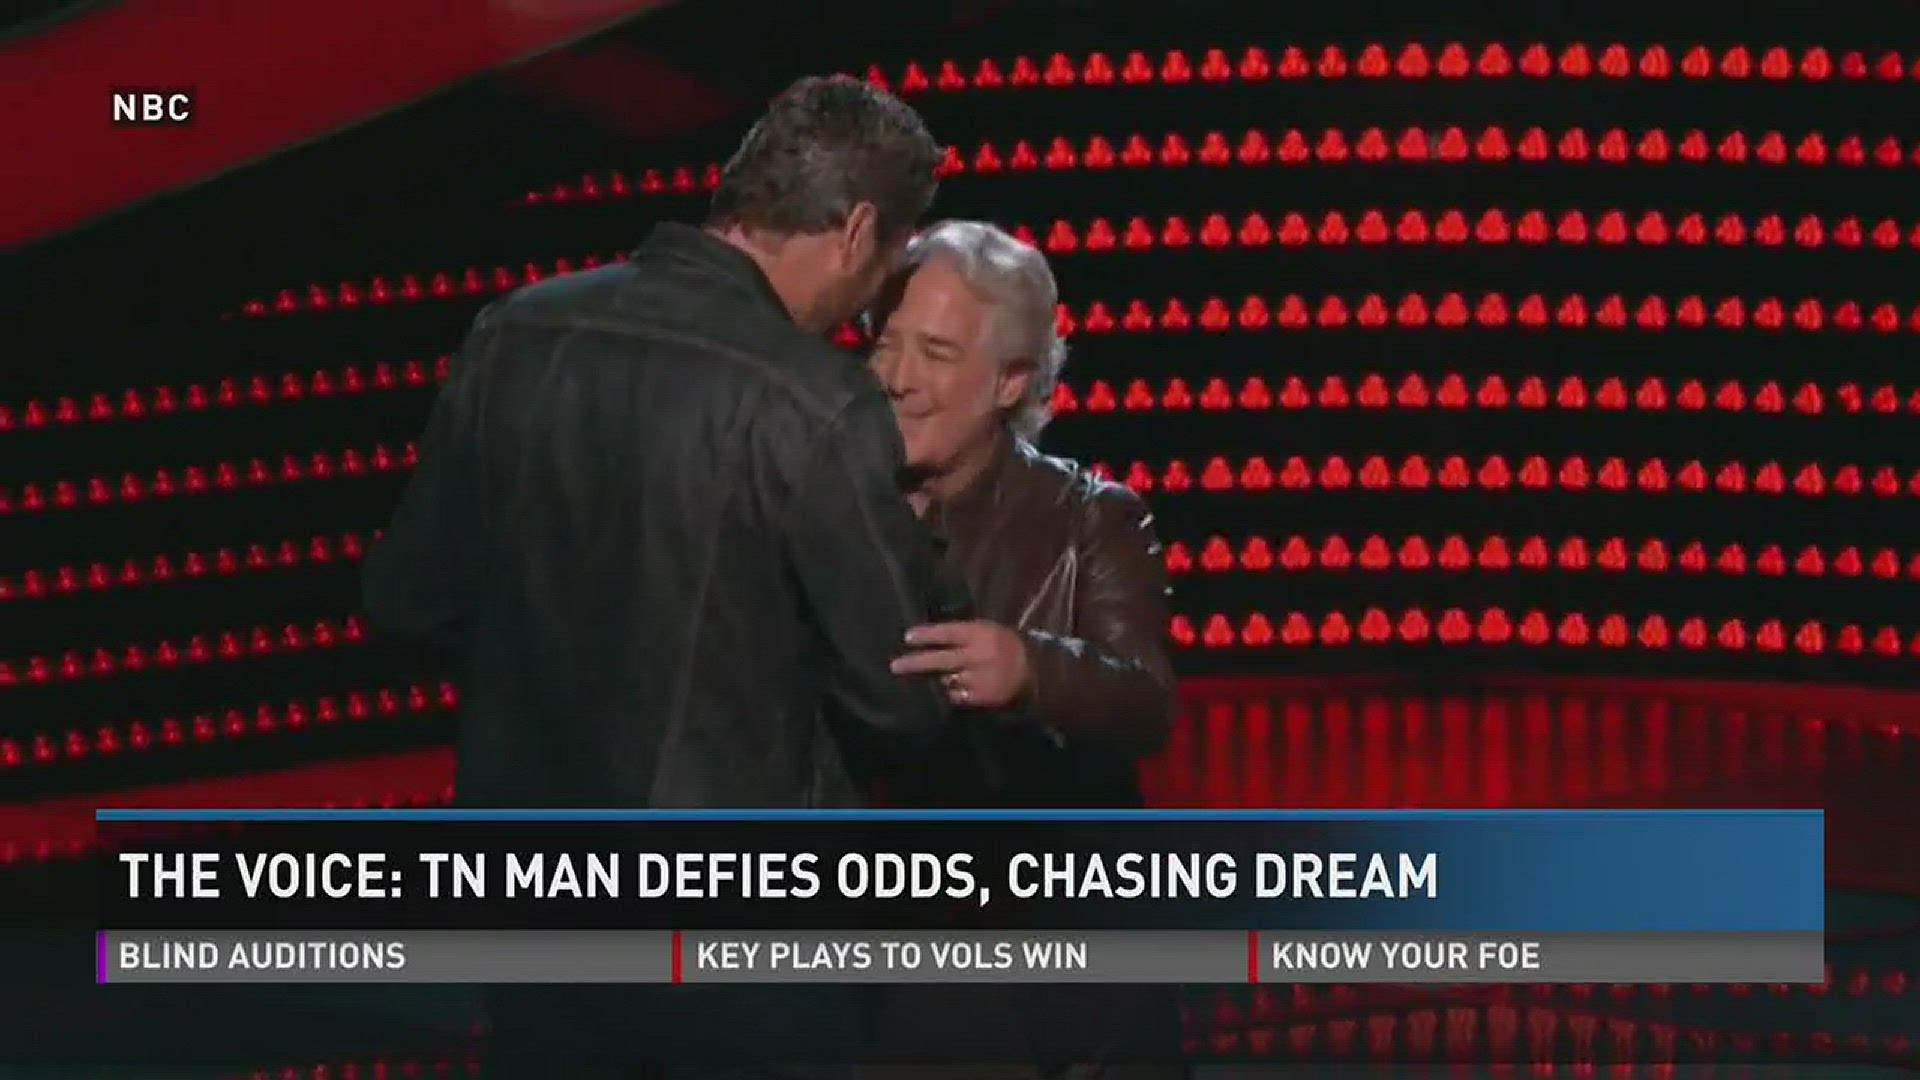 The oldest contestant on this season of "The Voice" is a Tennessee man chasing his dreams.